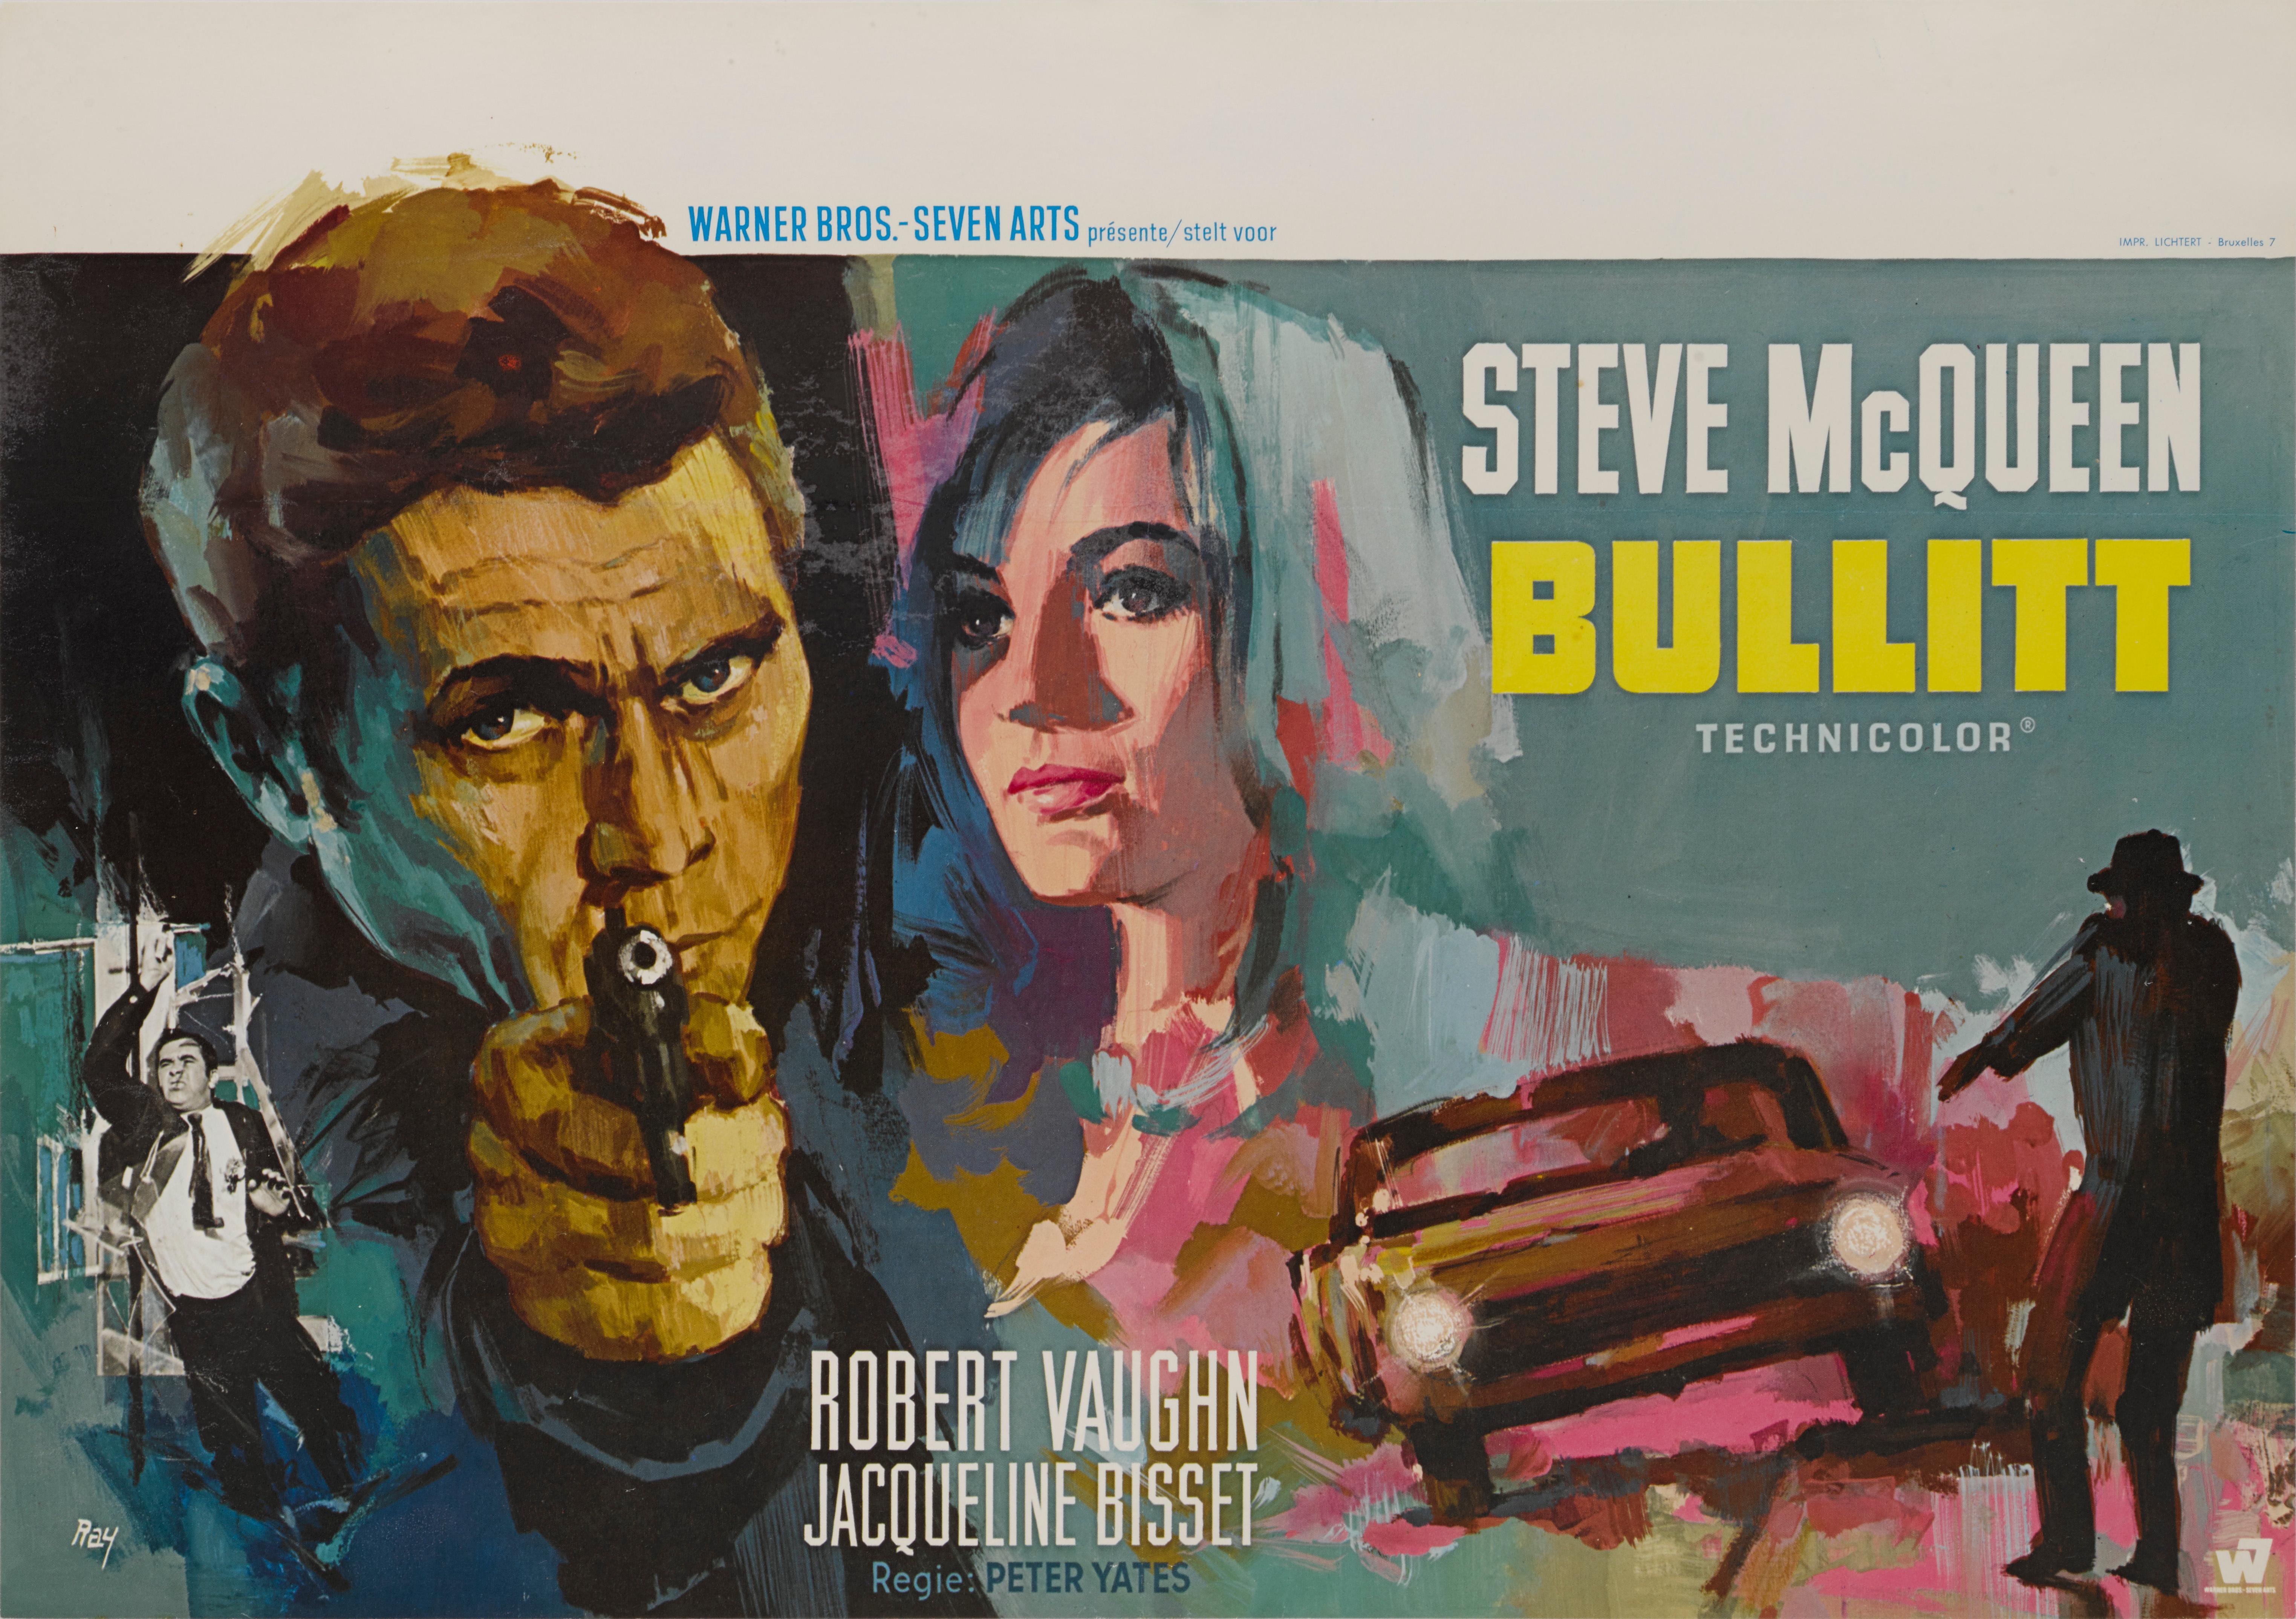 Original Belgian film poster. This poster would have been used in Belgium when the film was first show.
Bullitt is undoubtedly Steve McQueen's most famous film. The artwork on this poster is unique to the films Belgium release.
This poster is